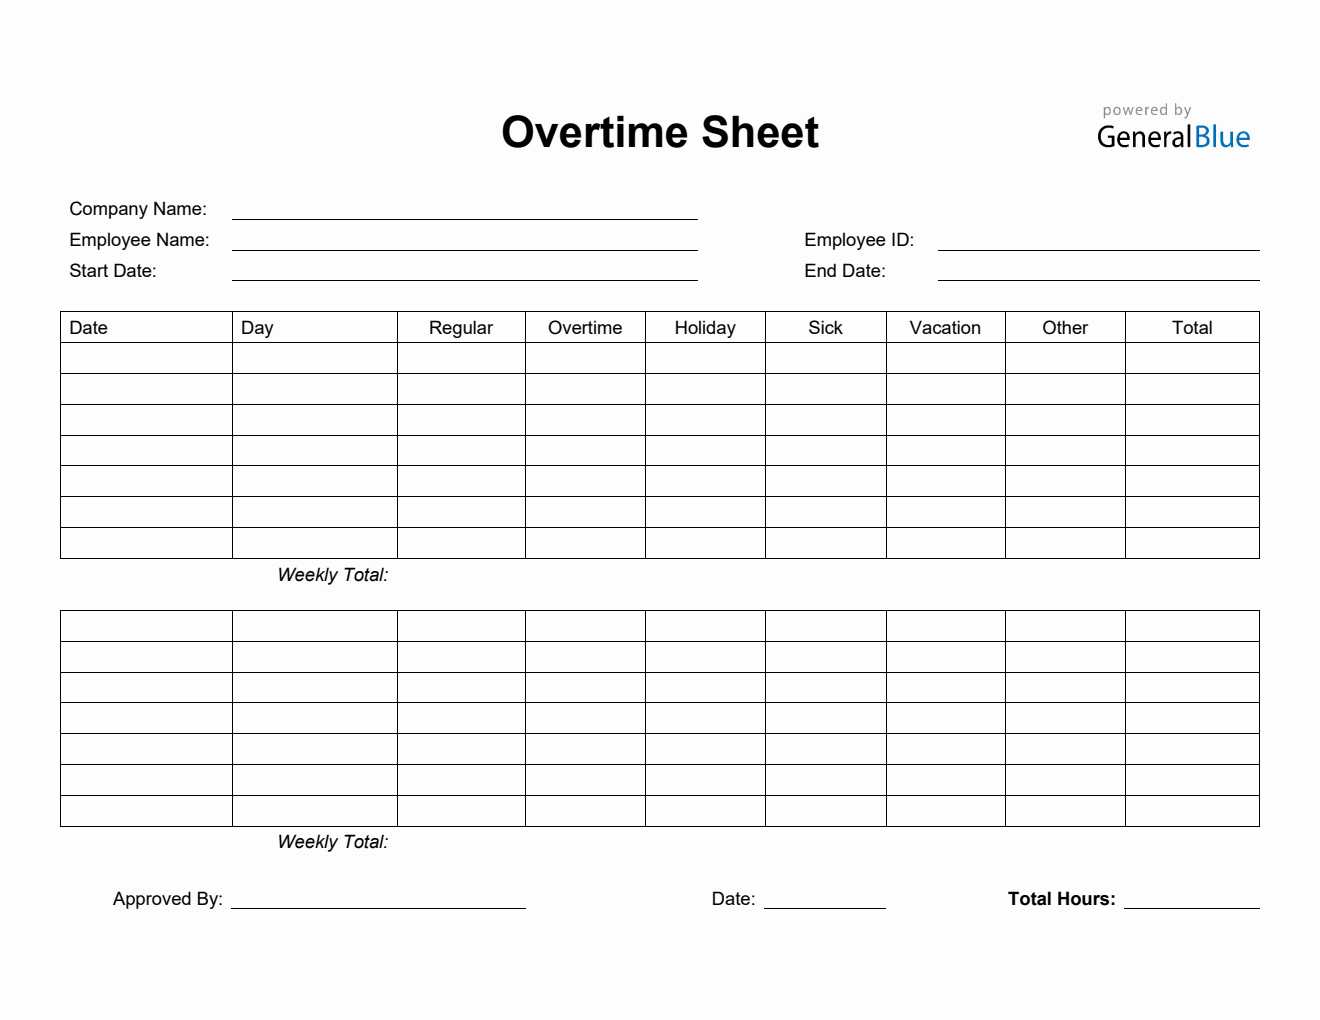 Overtime Sheet in PDF (Simple)